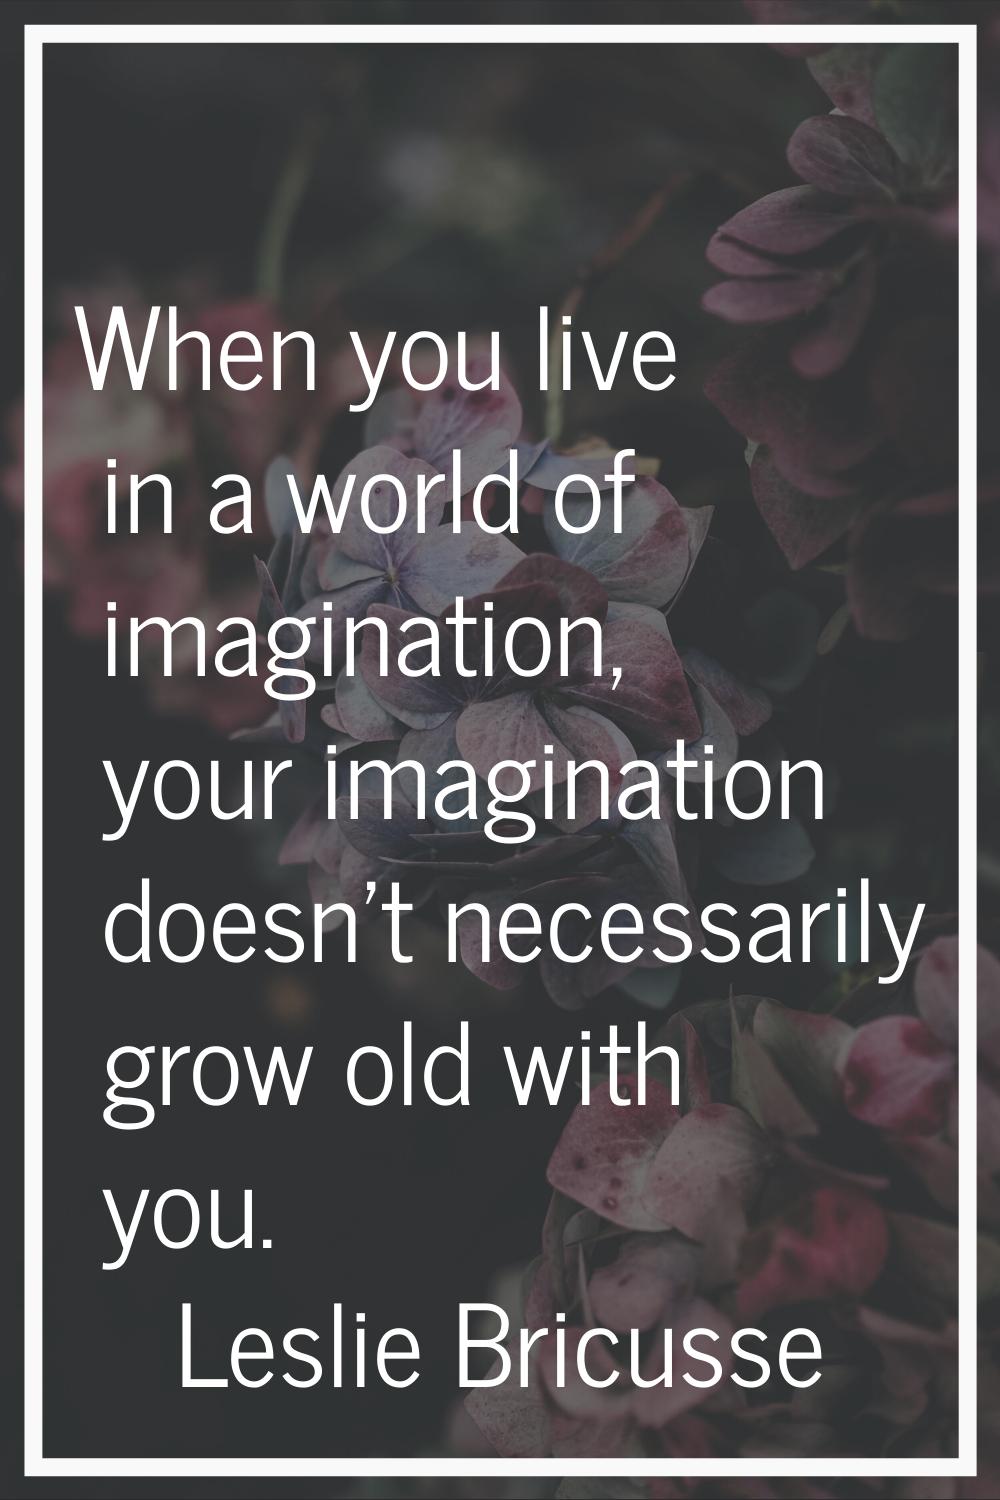 When you live in a world of imagination, your imagination doesn't necessarily grow old with you.